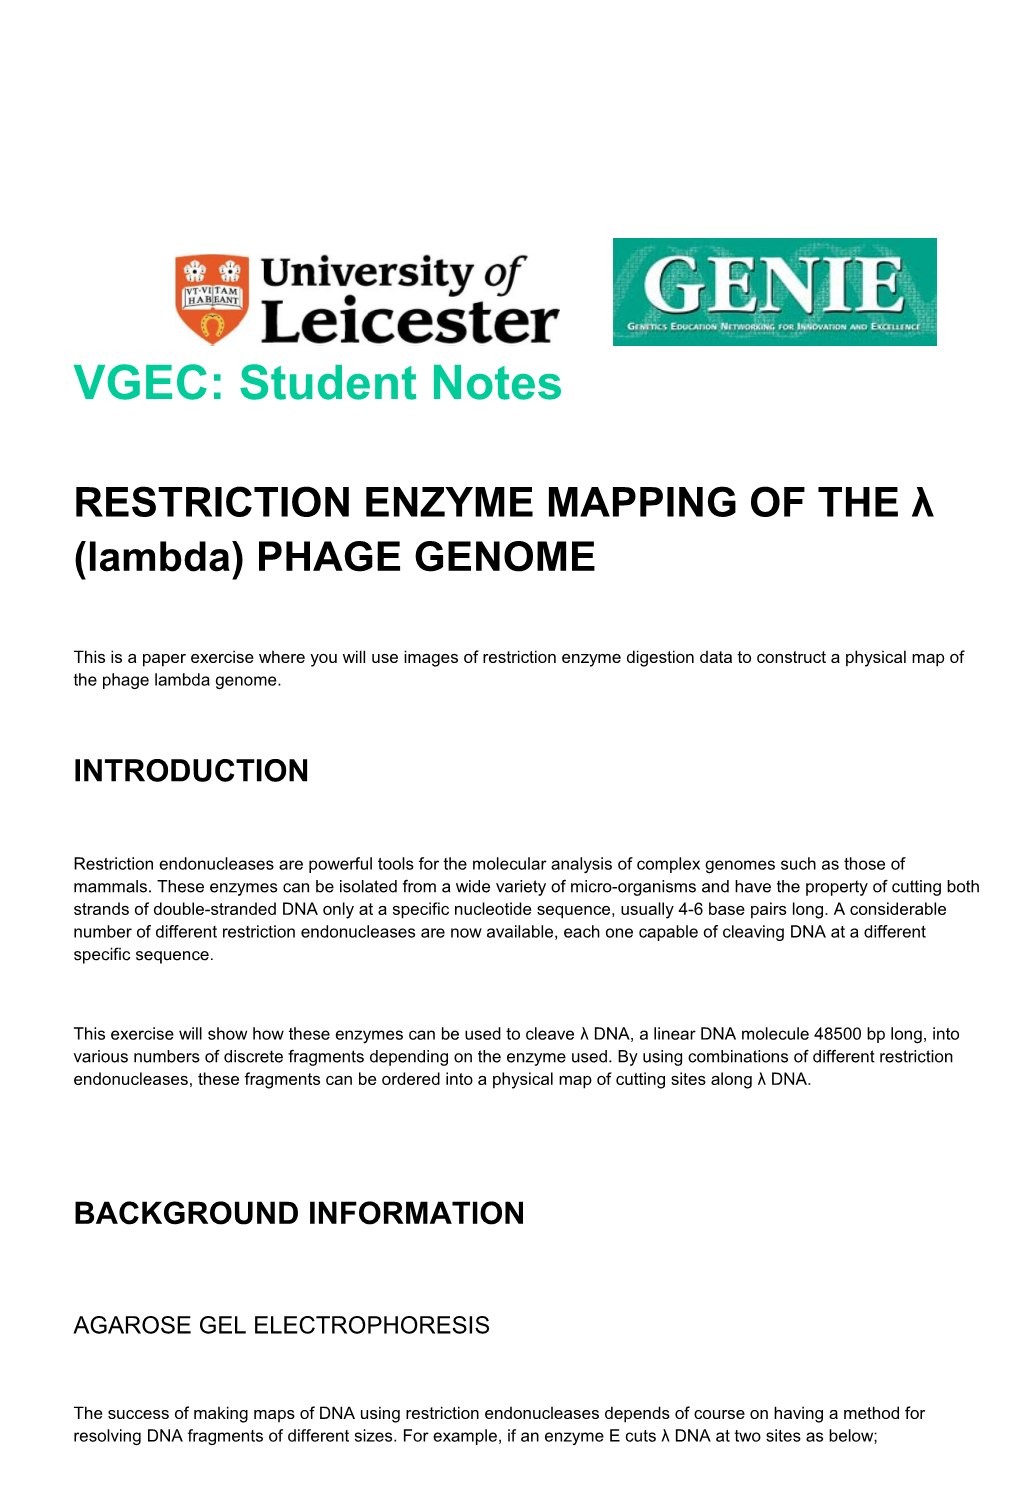 Restriction Enzyme Mapping of the Lambda Phage Genome , Student Notes, Tutorial